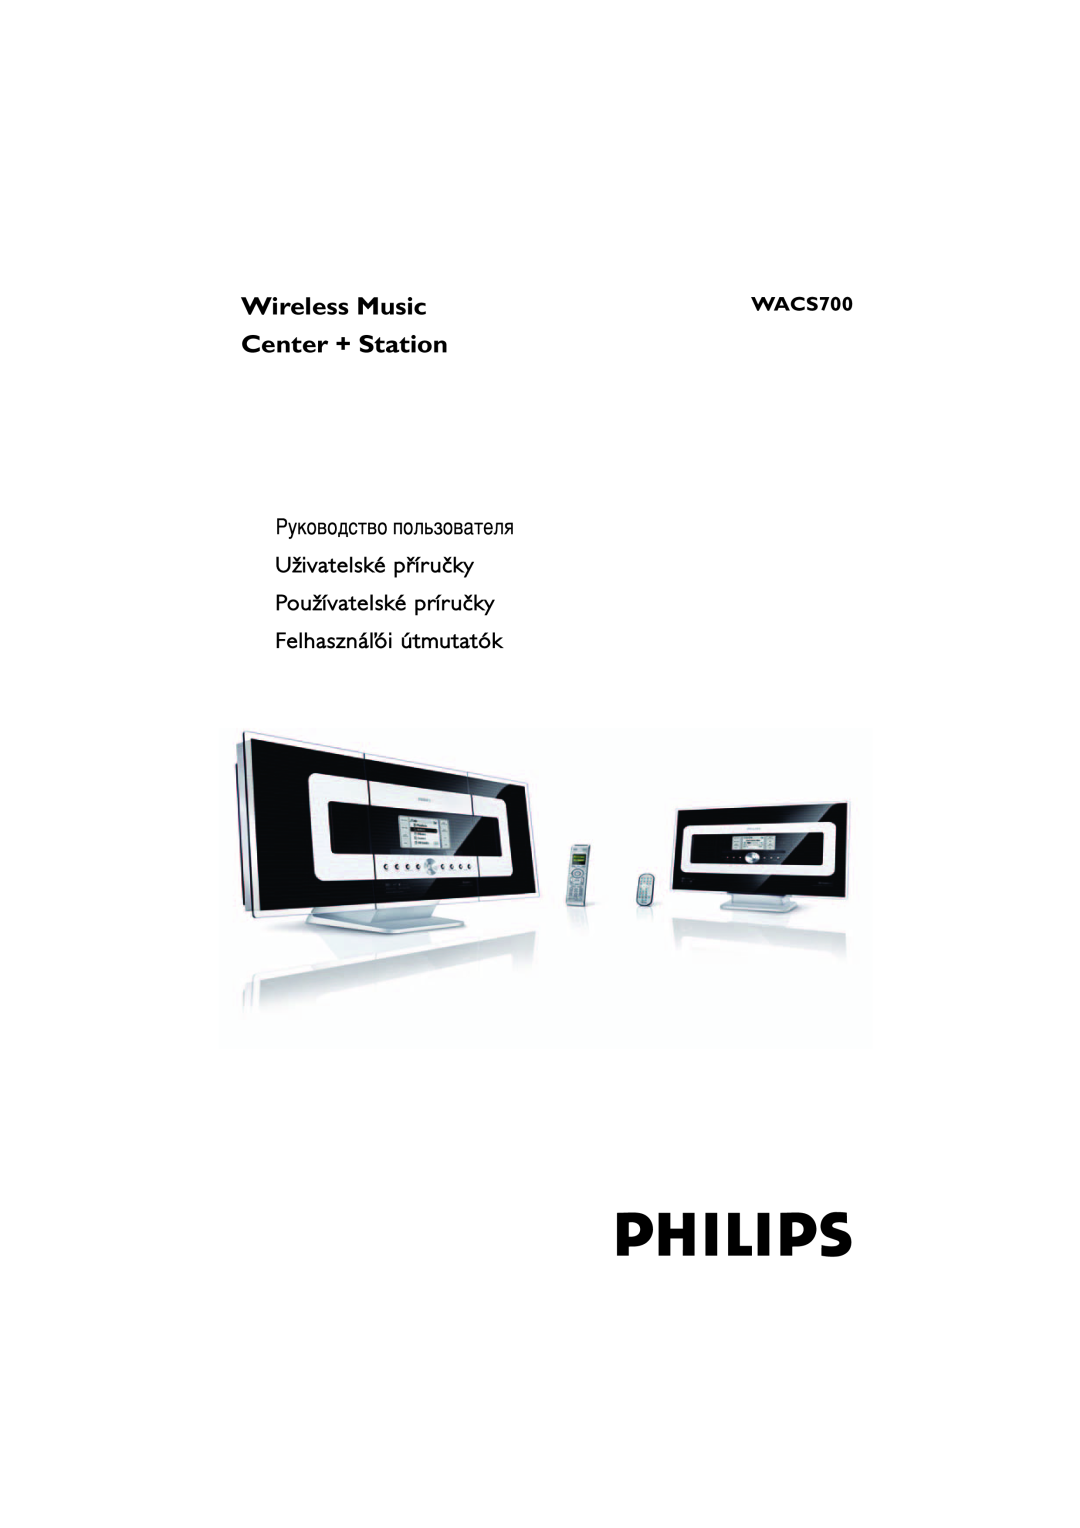 Philips owner manual Wireless Music Center + Station WACS700, Need Help Fast?, Thank You For Choosing Philips 